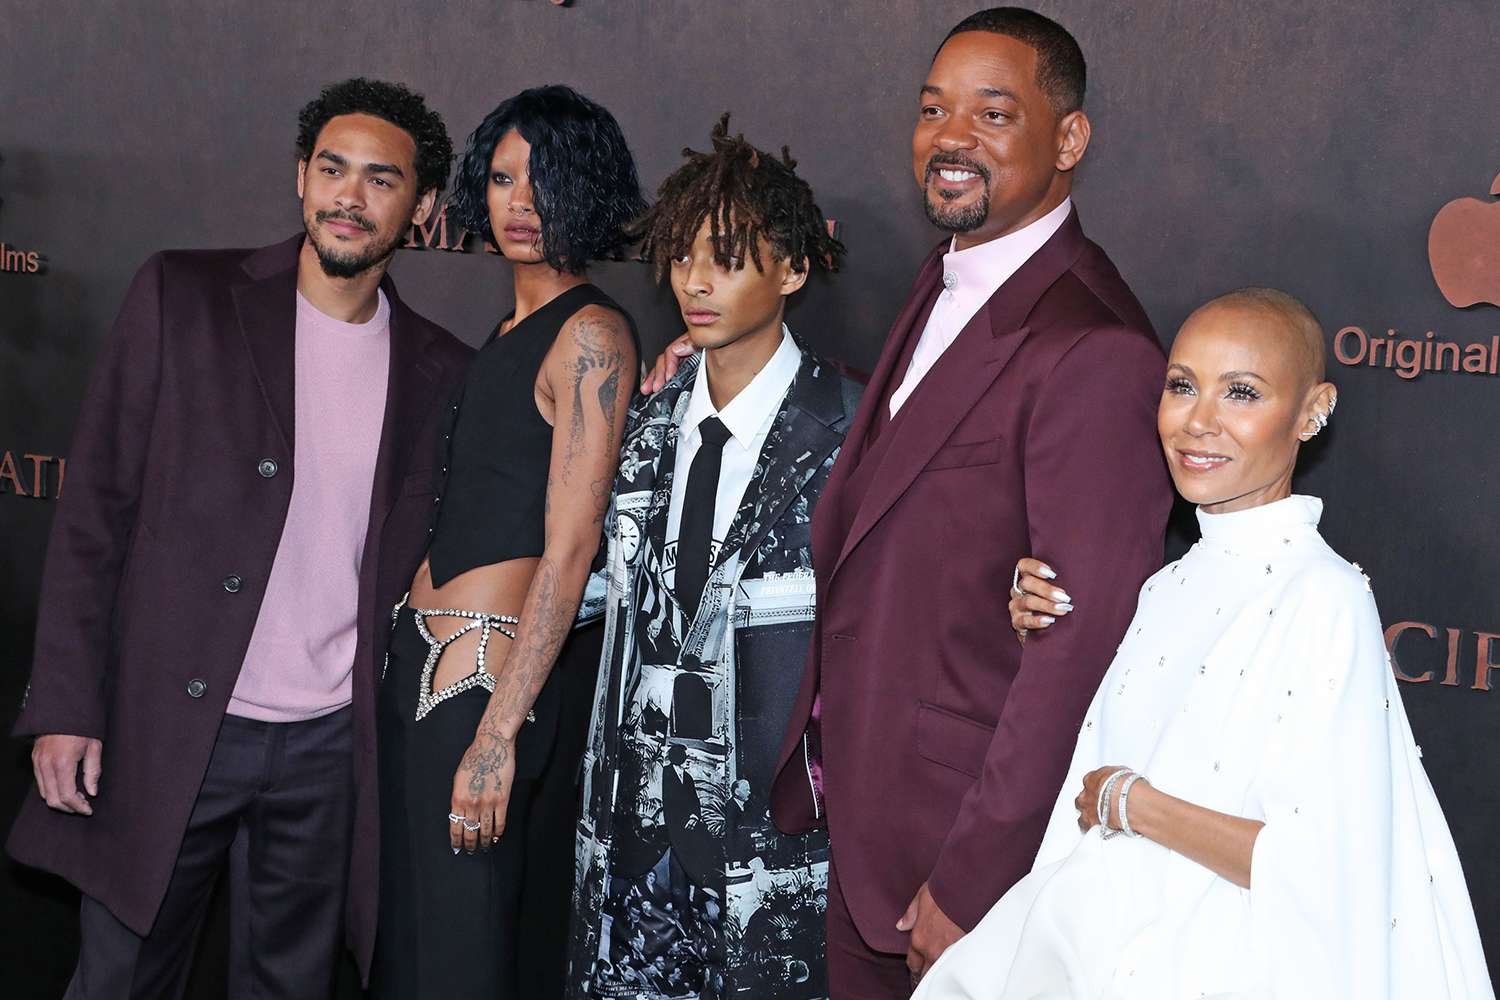 Will Smith Attends Emancipation Premiere in Los Angeles with His Family